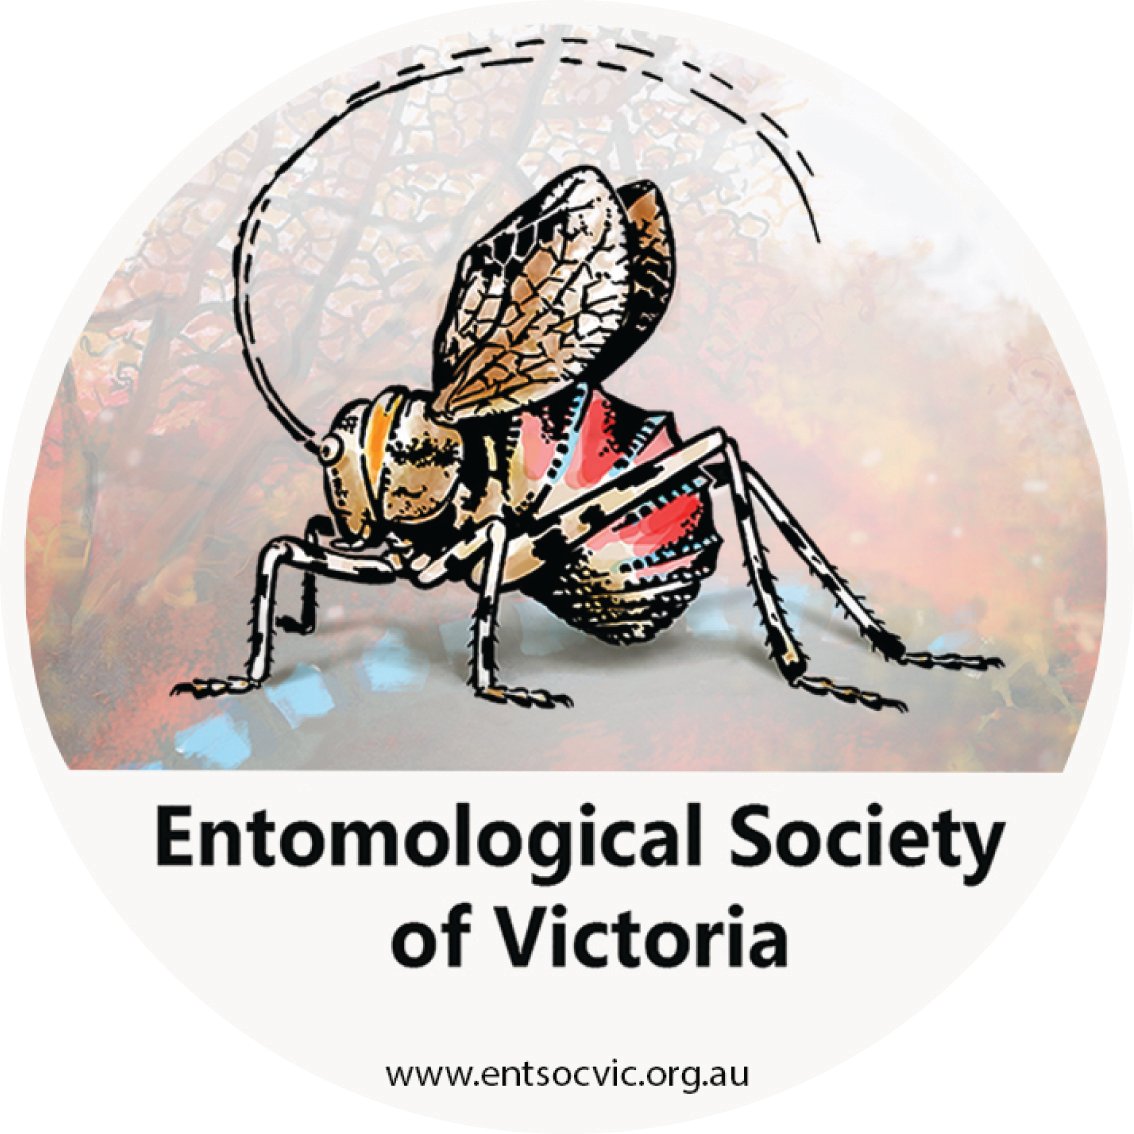 Entomological Society of Victoria | Amateur and professional #insect enthusiasts | Making #entomology accessible | Tweet us your #victorianinsects !